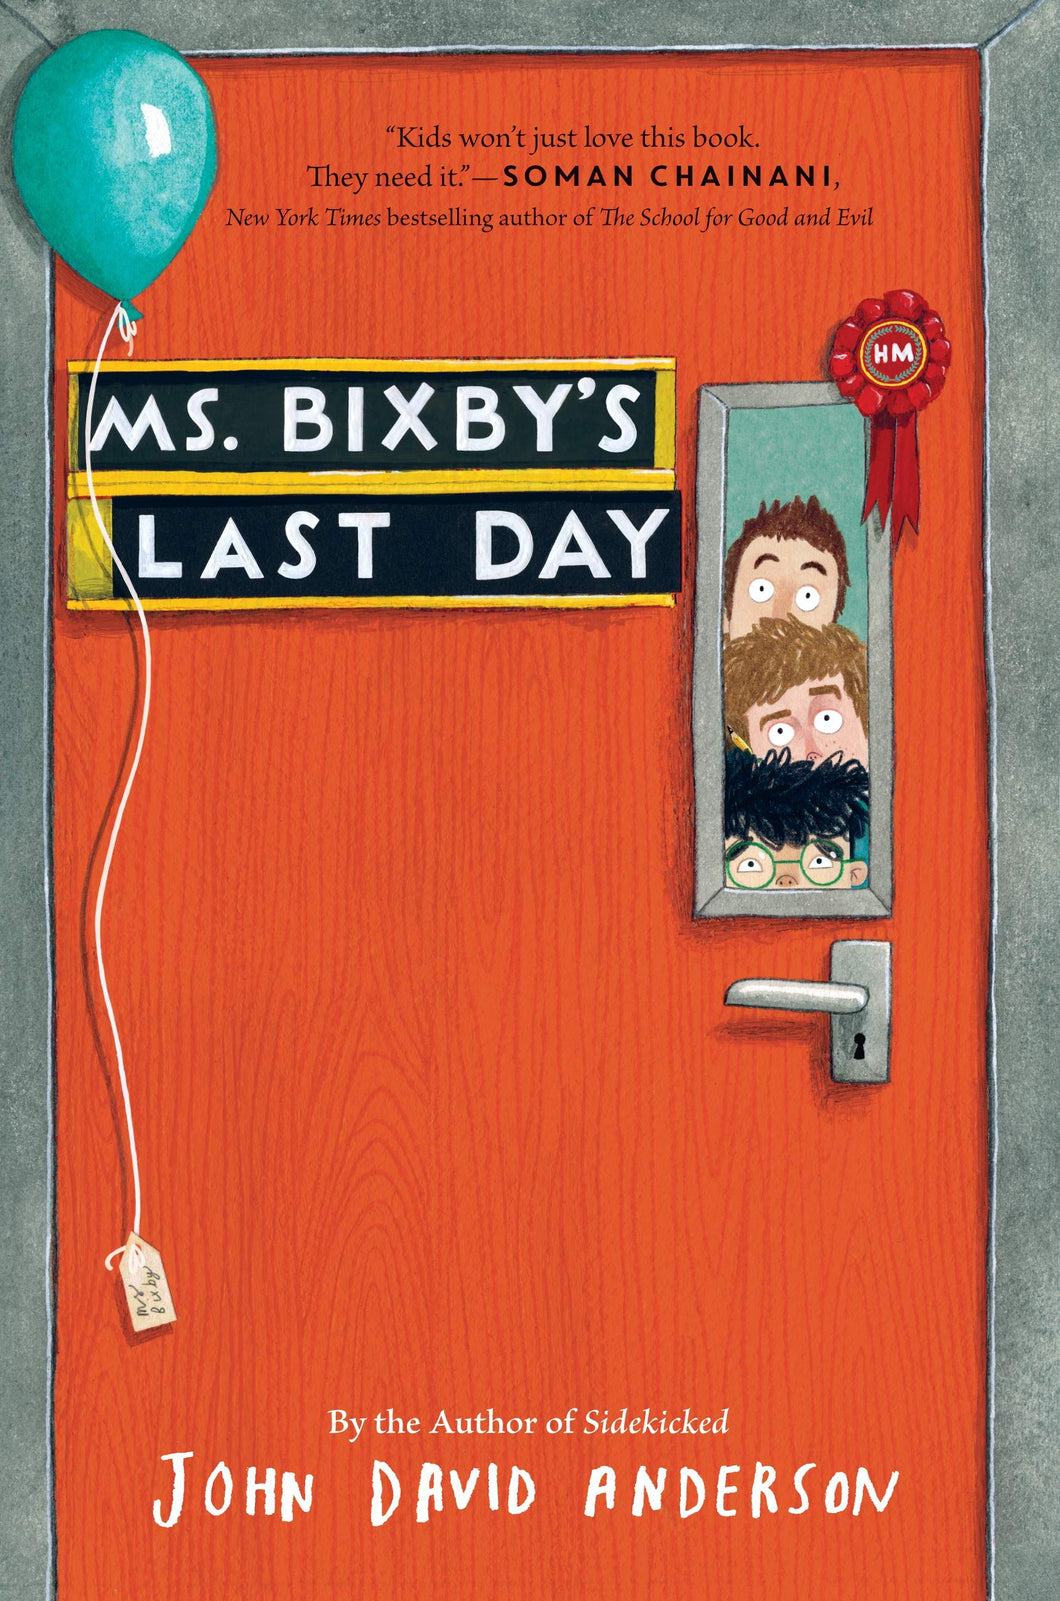 Ms. Bixby's Last Day by John David Anderson - NEW BOOK